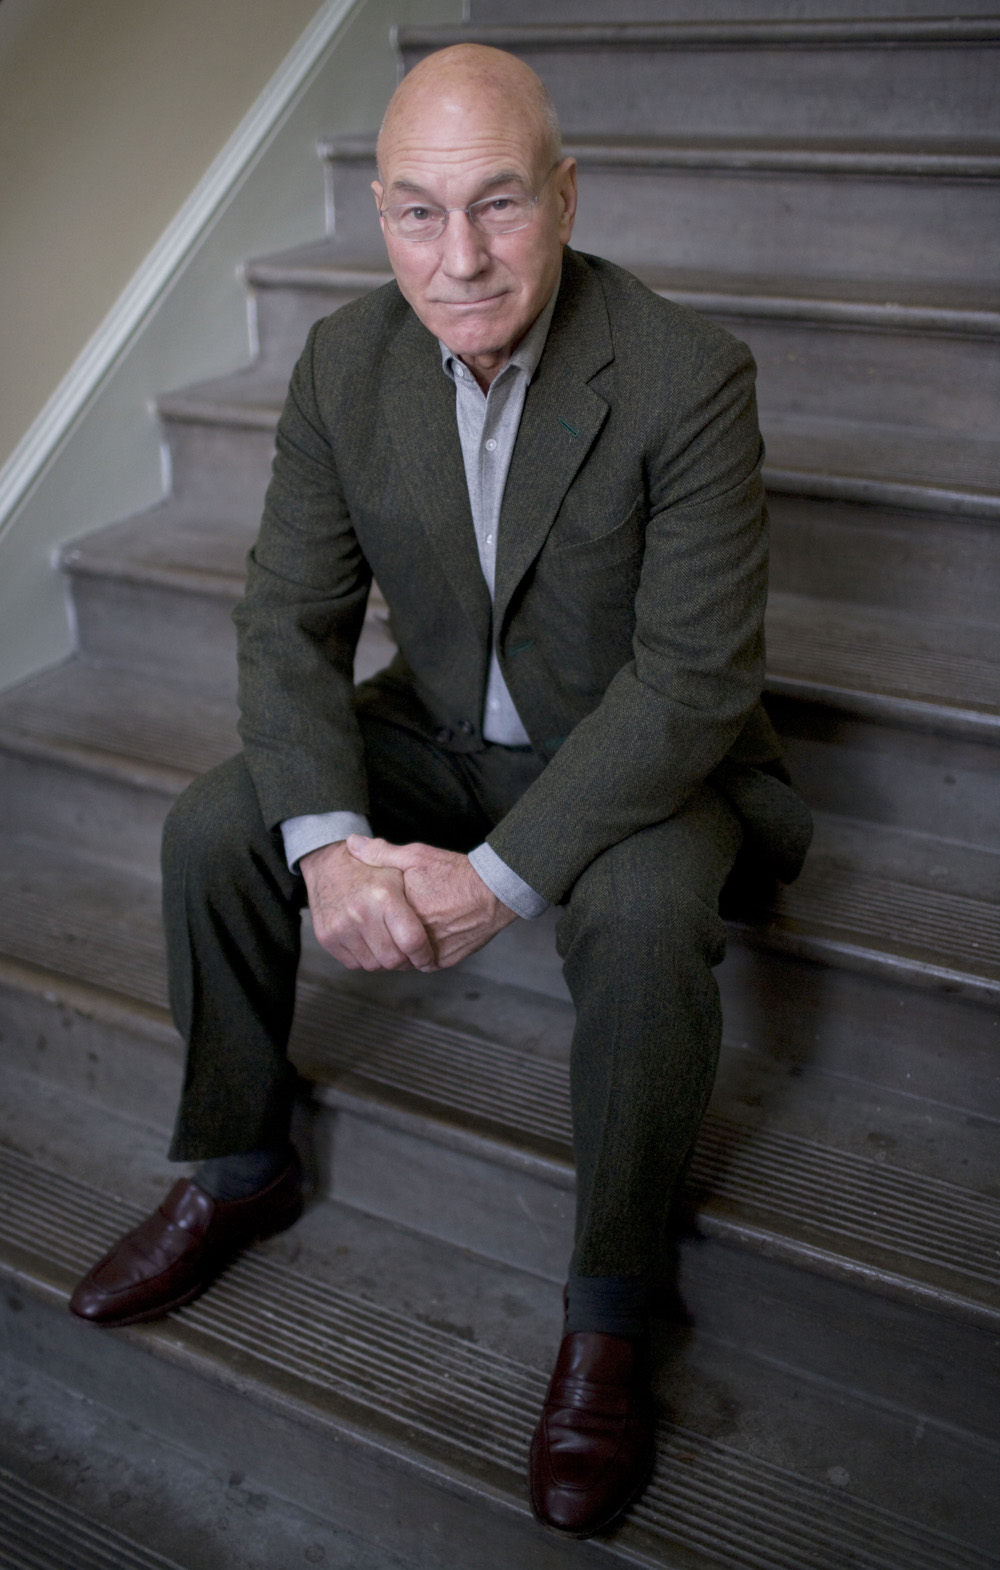 <p>Patrick Stewart attends the Cheltenham Literary Festival in Gloucestershire, Britain on Oct. 19, 2008. He wore a sandy green-grey suit.</p>